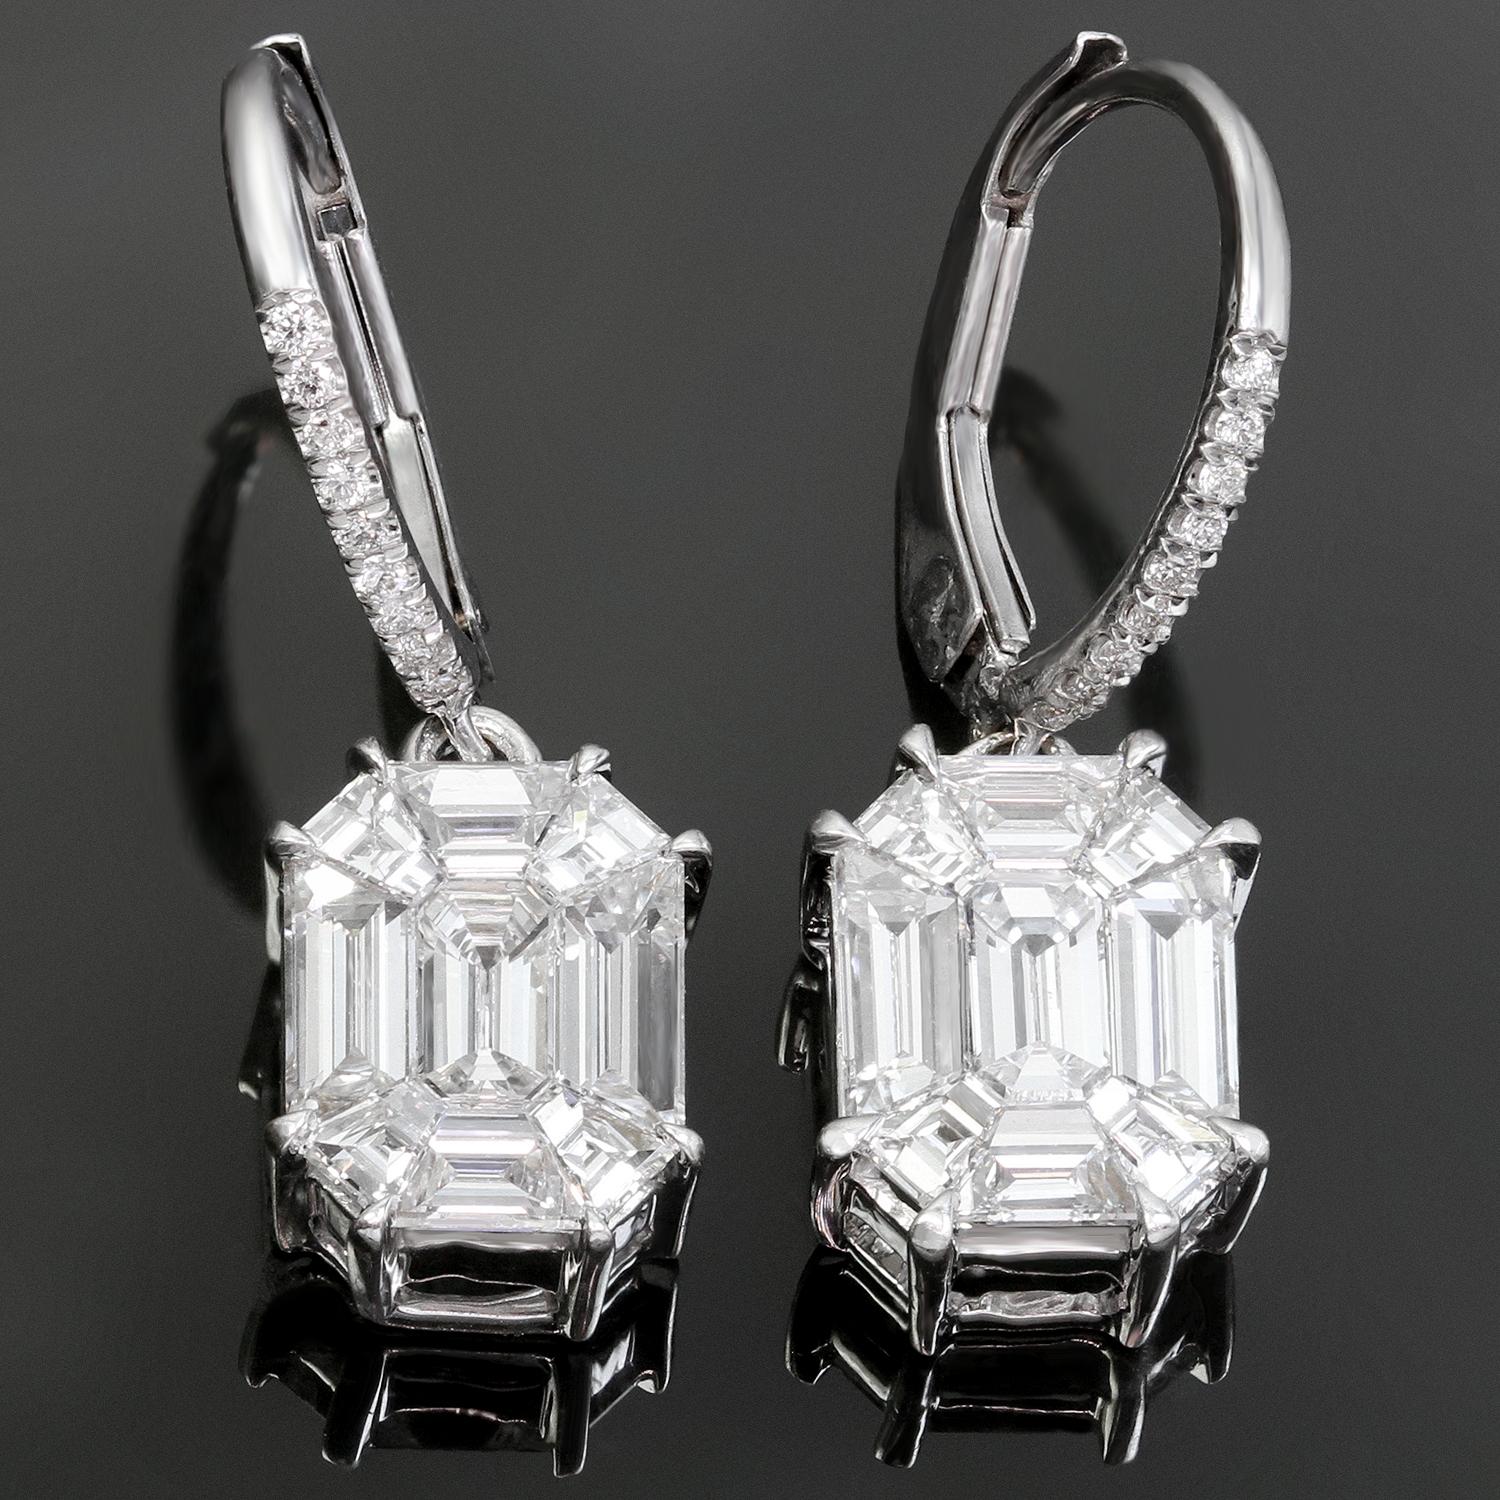 These exquisite modern drop earrings are crafted in 18k white gold and feature tapered baguette and emerald-cut G-H VVS2-VS1 diamonds weighting an estimated 2.50 carats and designed to create an illusion of 3.5 carat single large  emerald cut